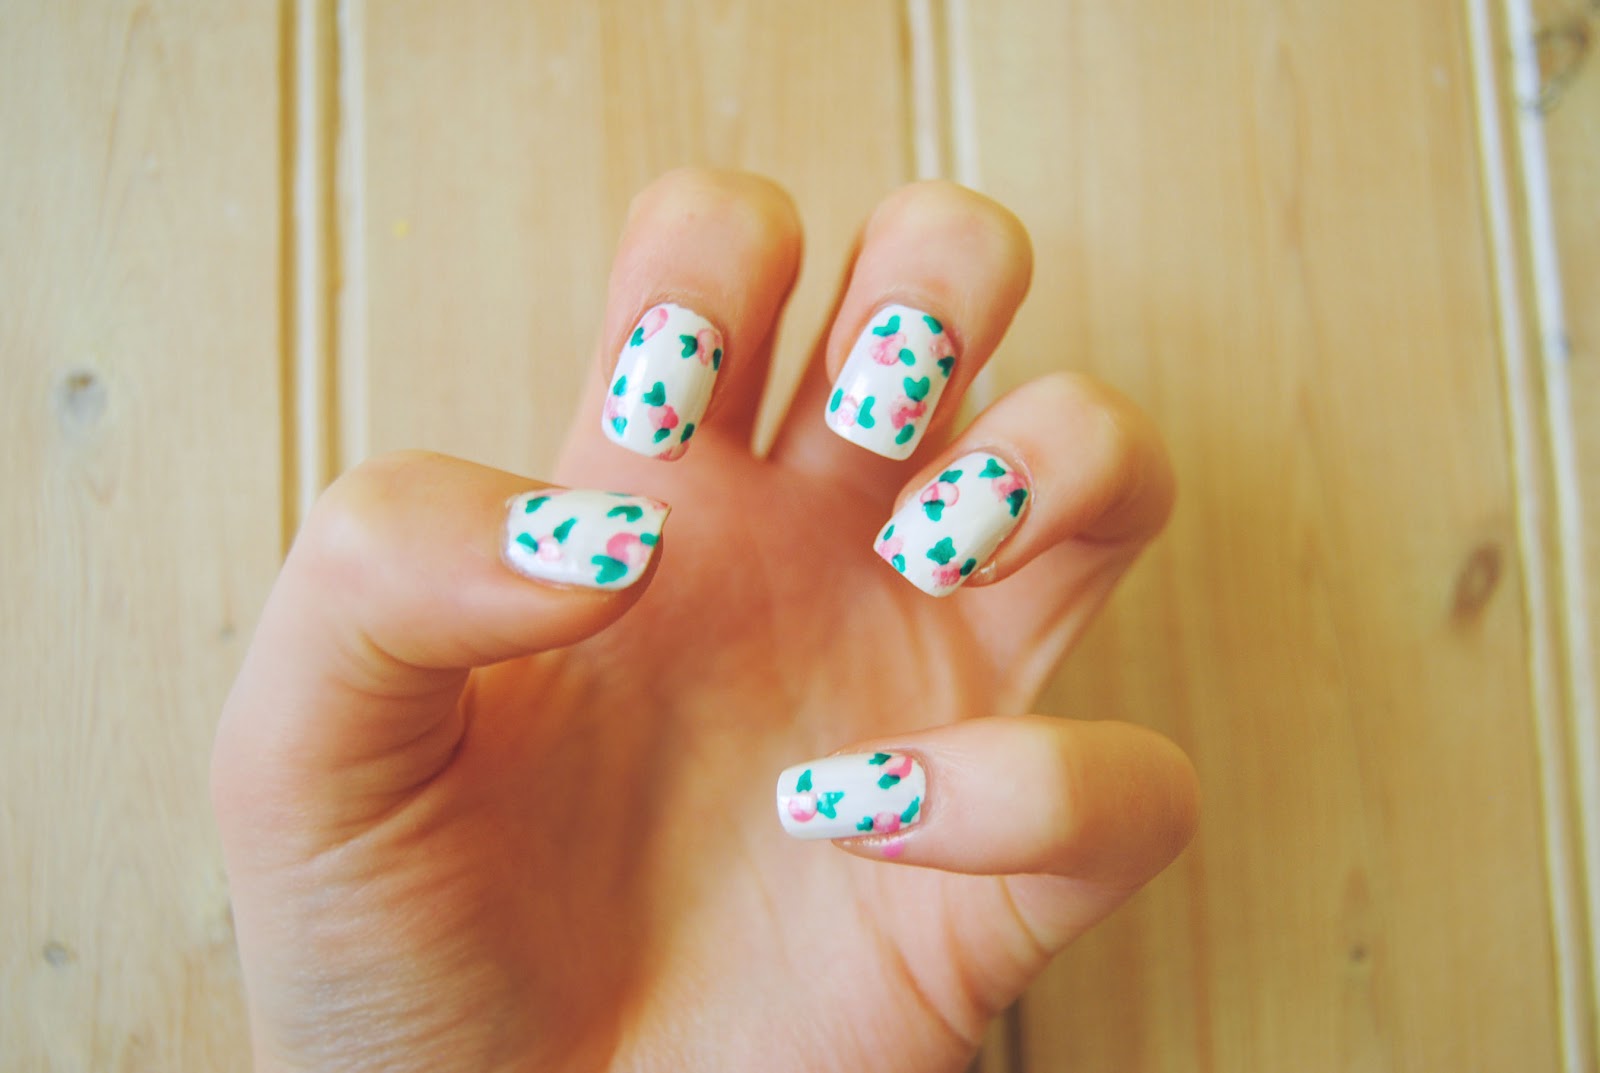 There are so many great floral nail designs out there and this is just my